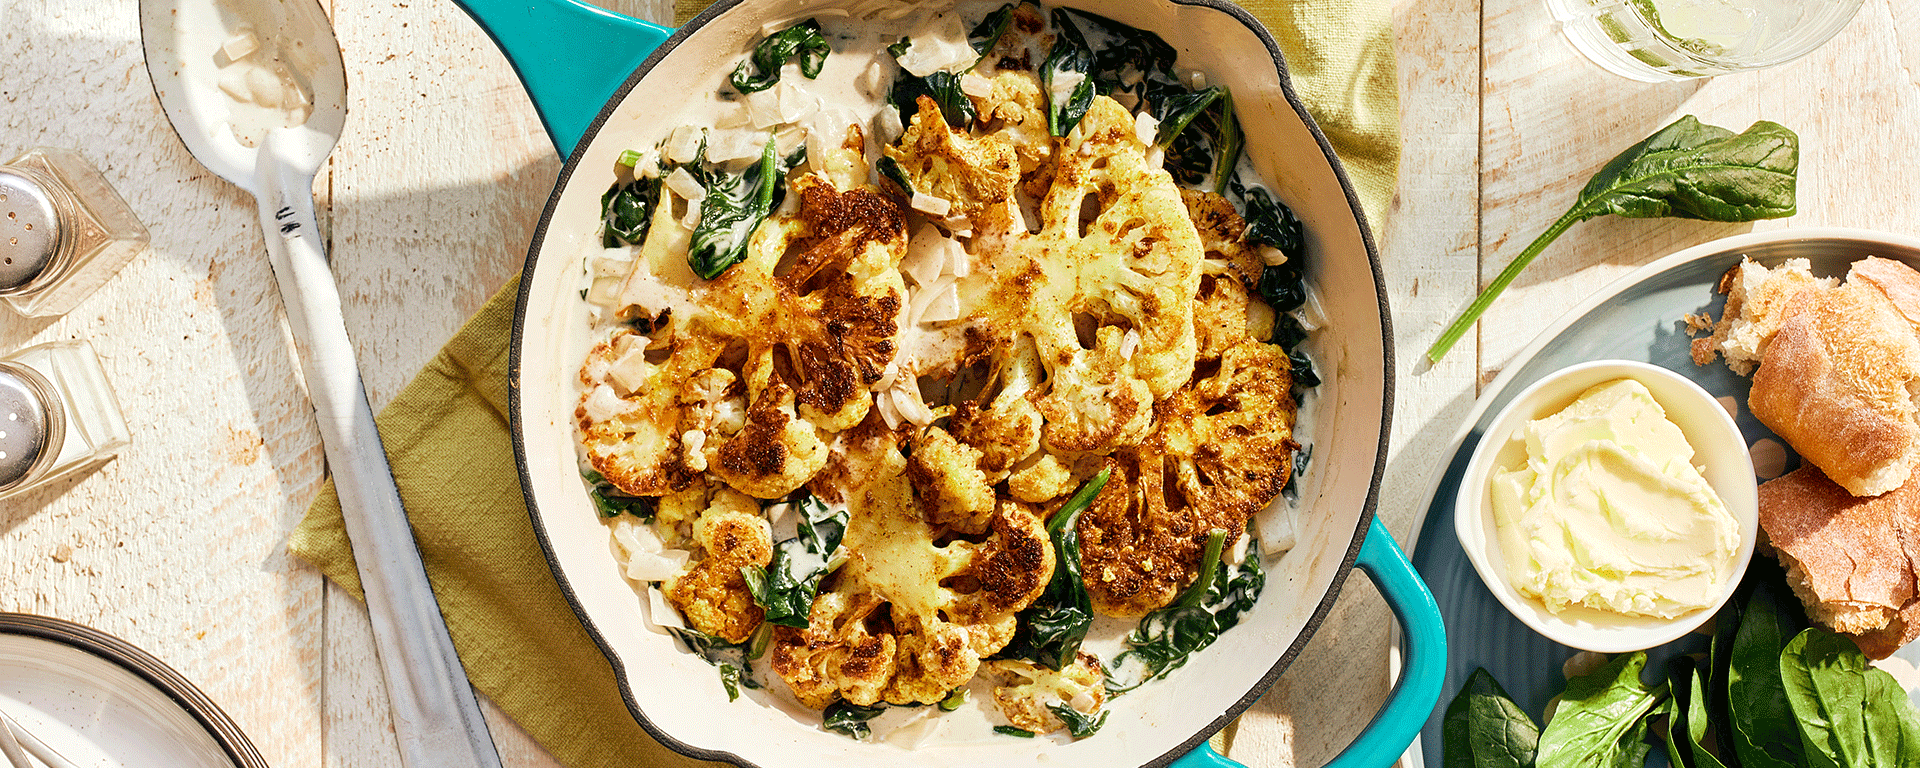 Photo for - Seared Cauliflower Steaks with Coconut Creamed Spinach